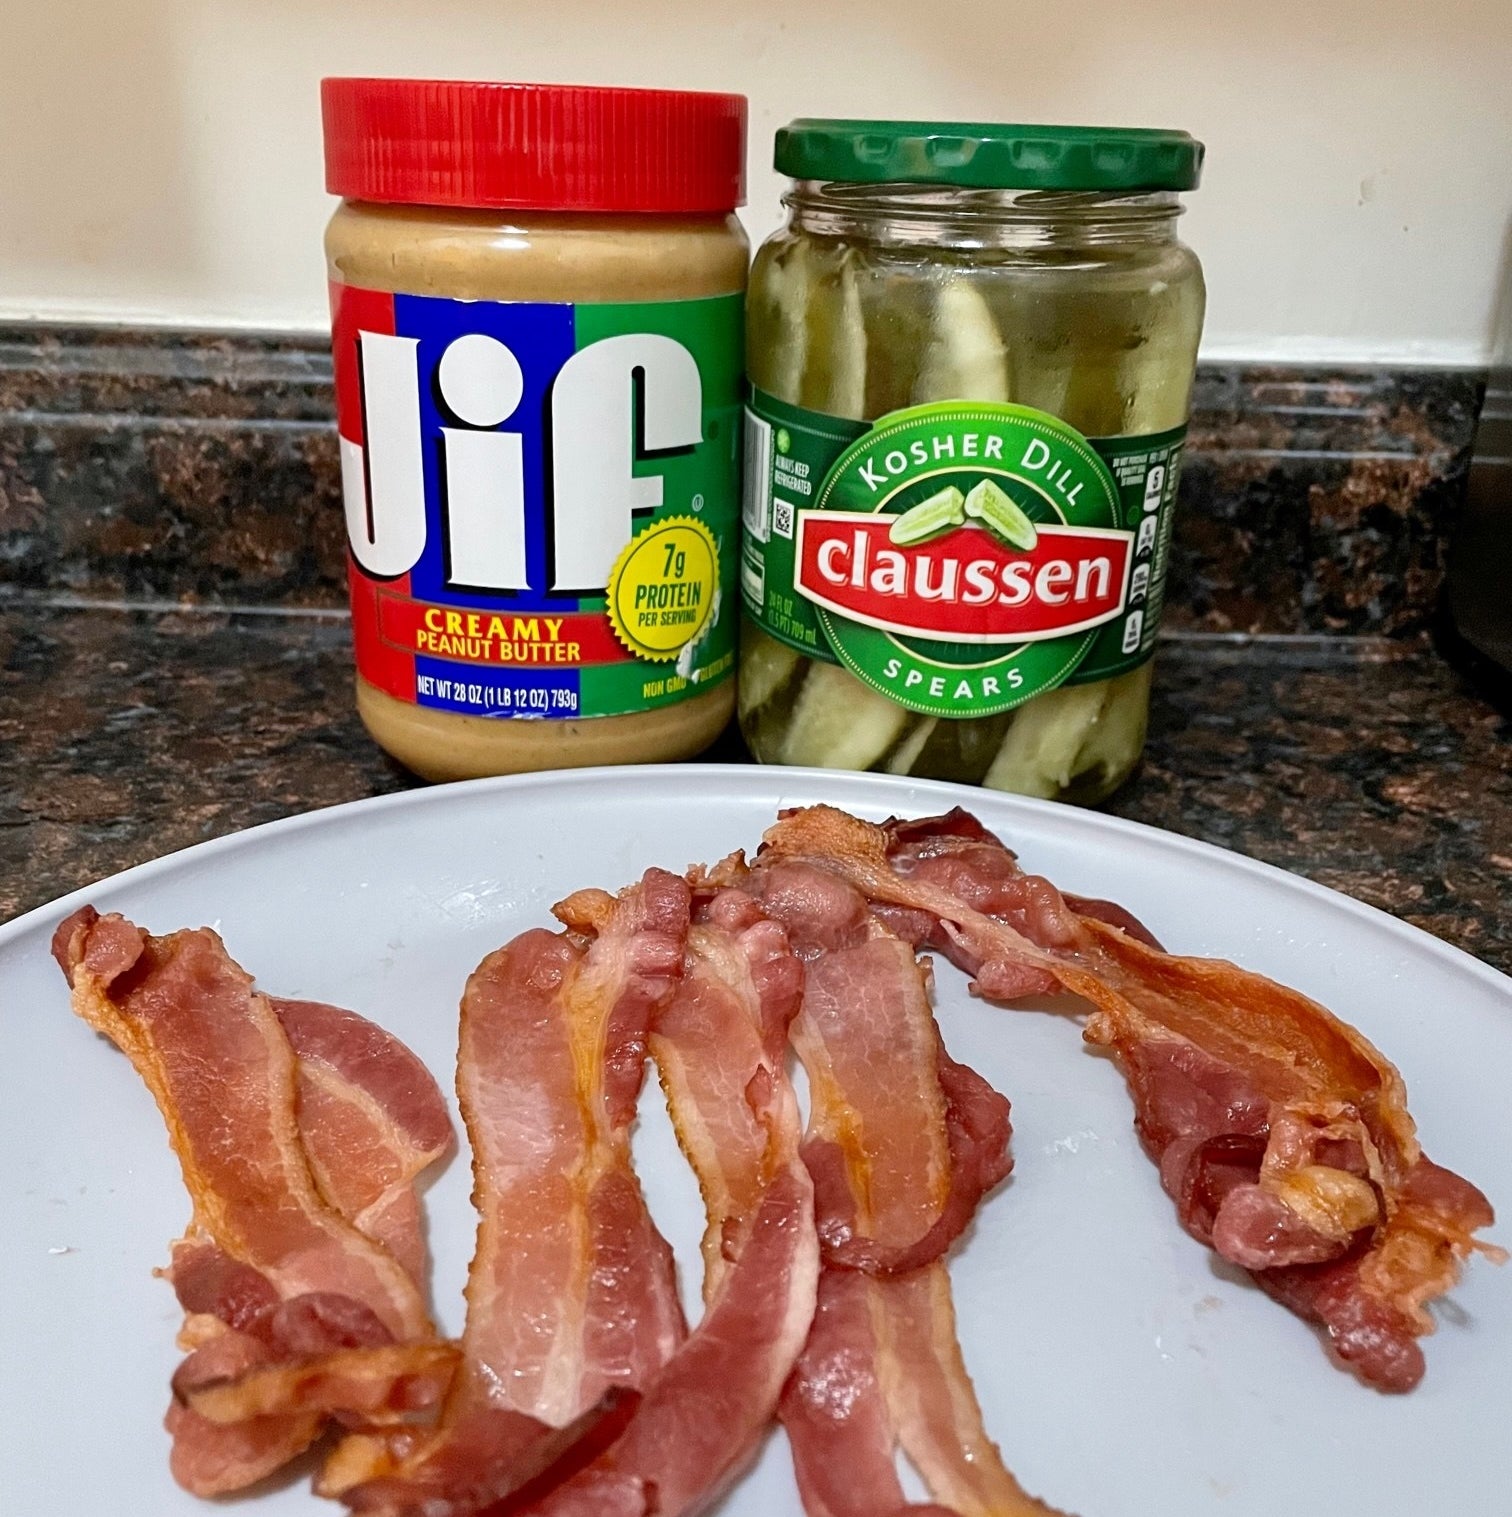 Peanut butter, bacon, and pickles